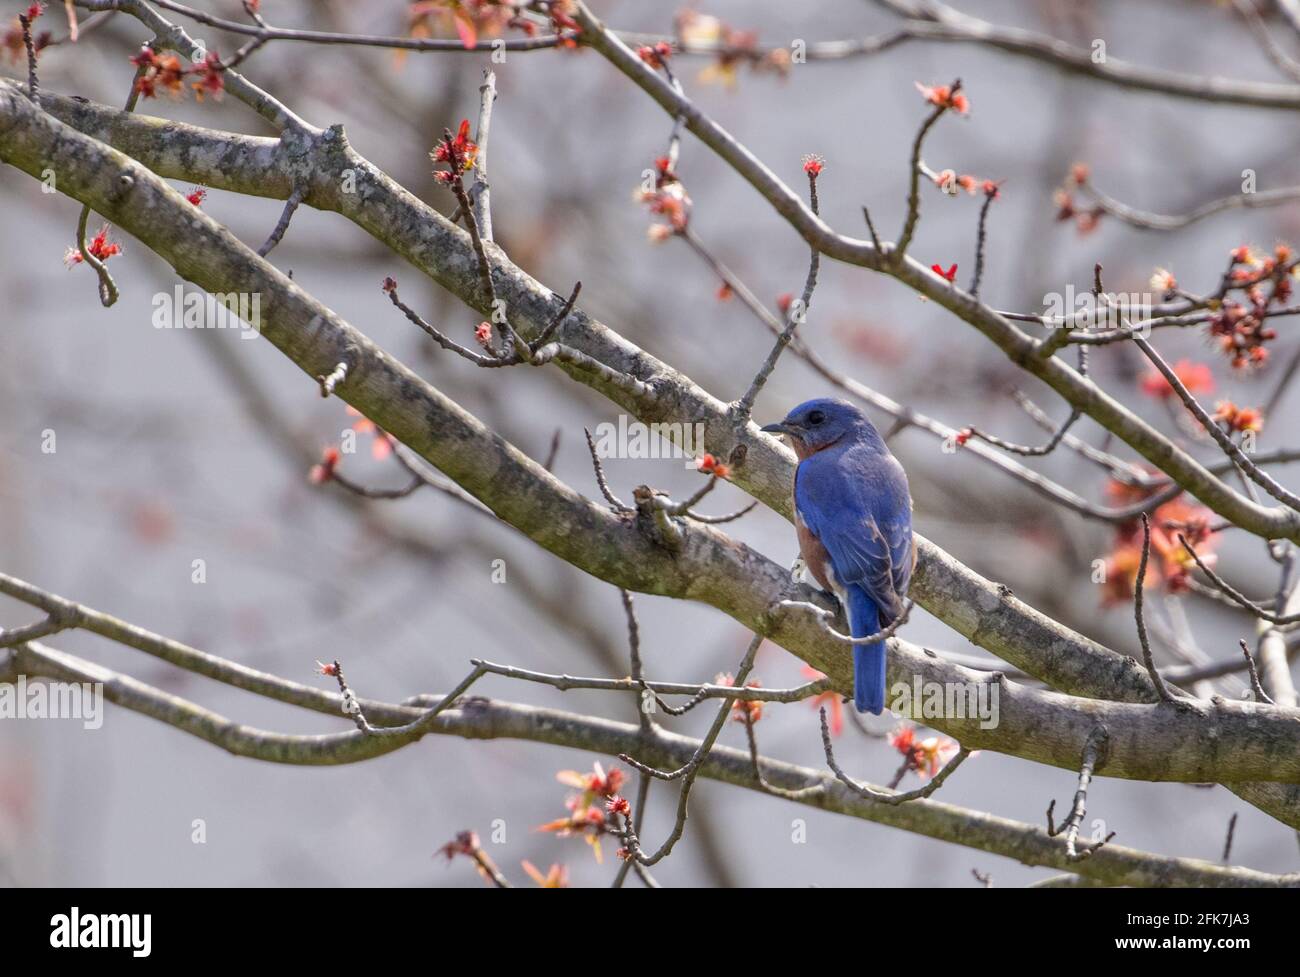 Eastern bluebird (Sialia sialis) - Hall County, Georgia. Male Eastern bluebird perched in a cherry tree on a late winter day. Stock Photo